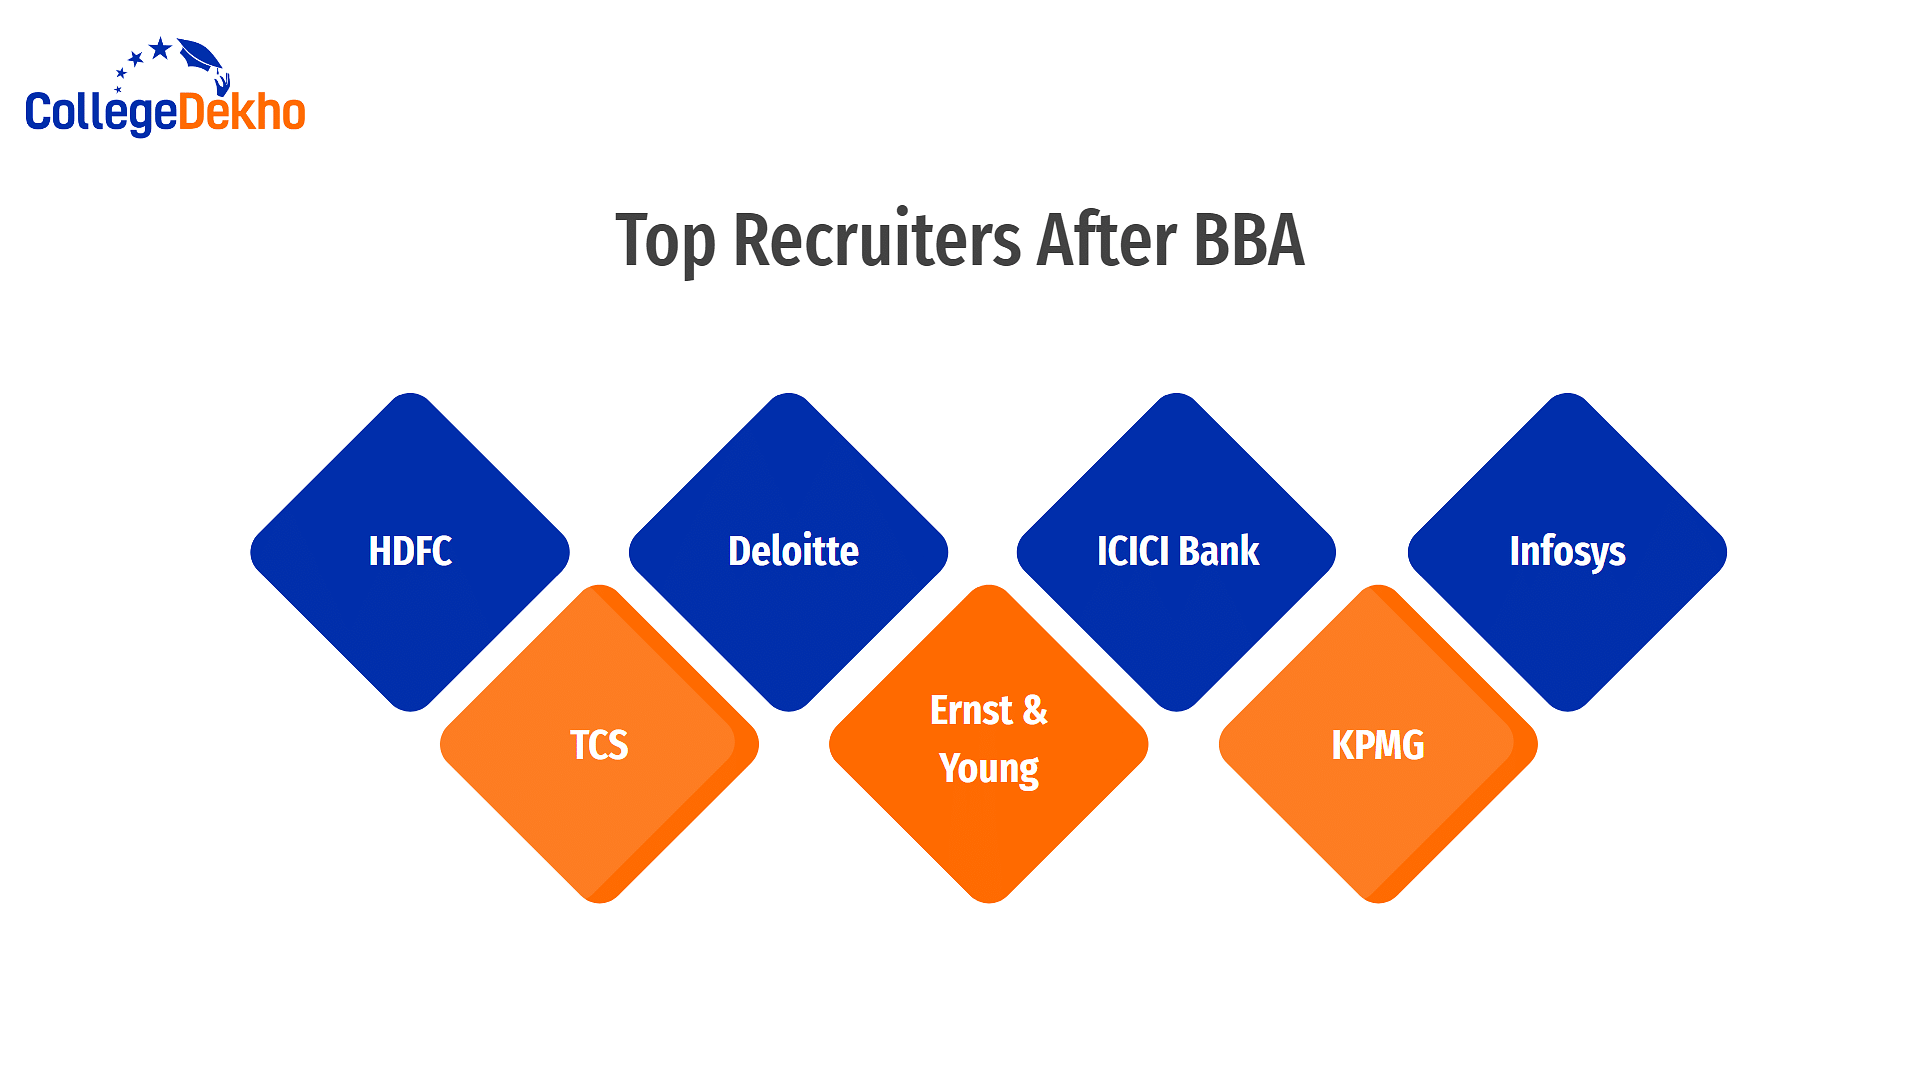 Top Recruiters After BBA